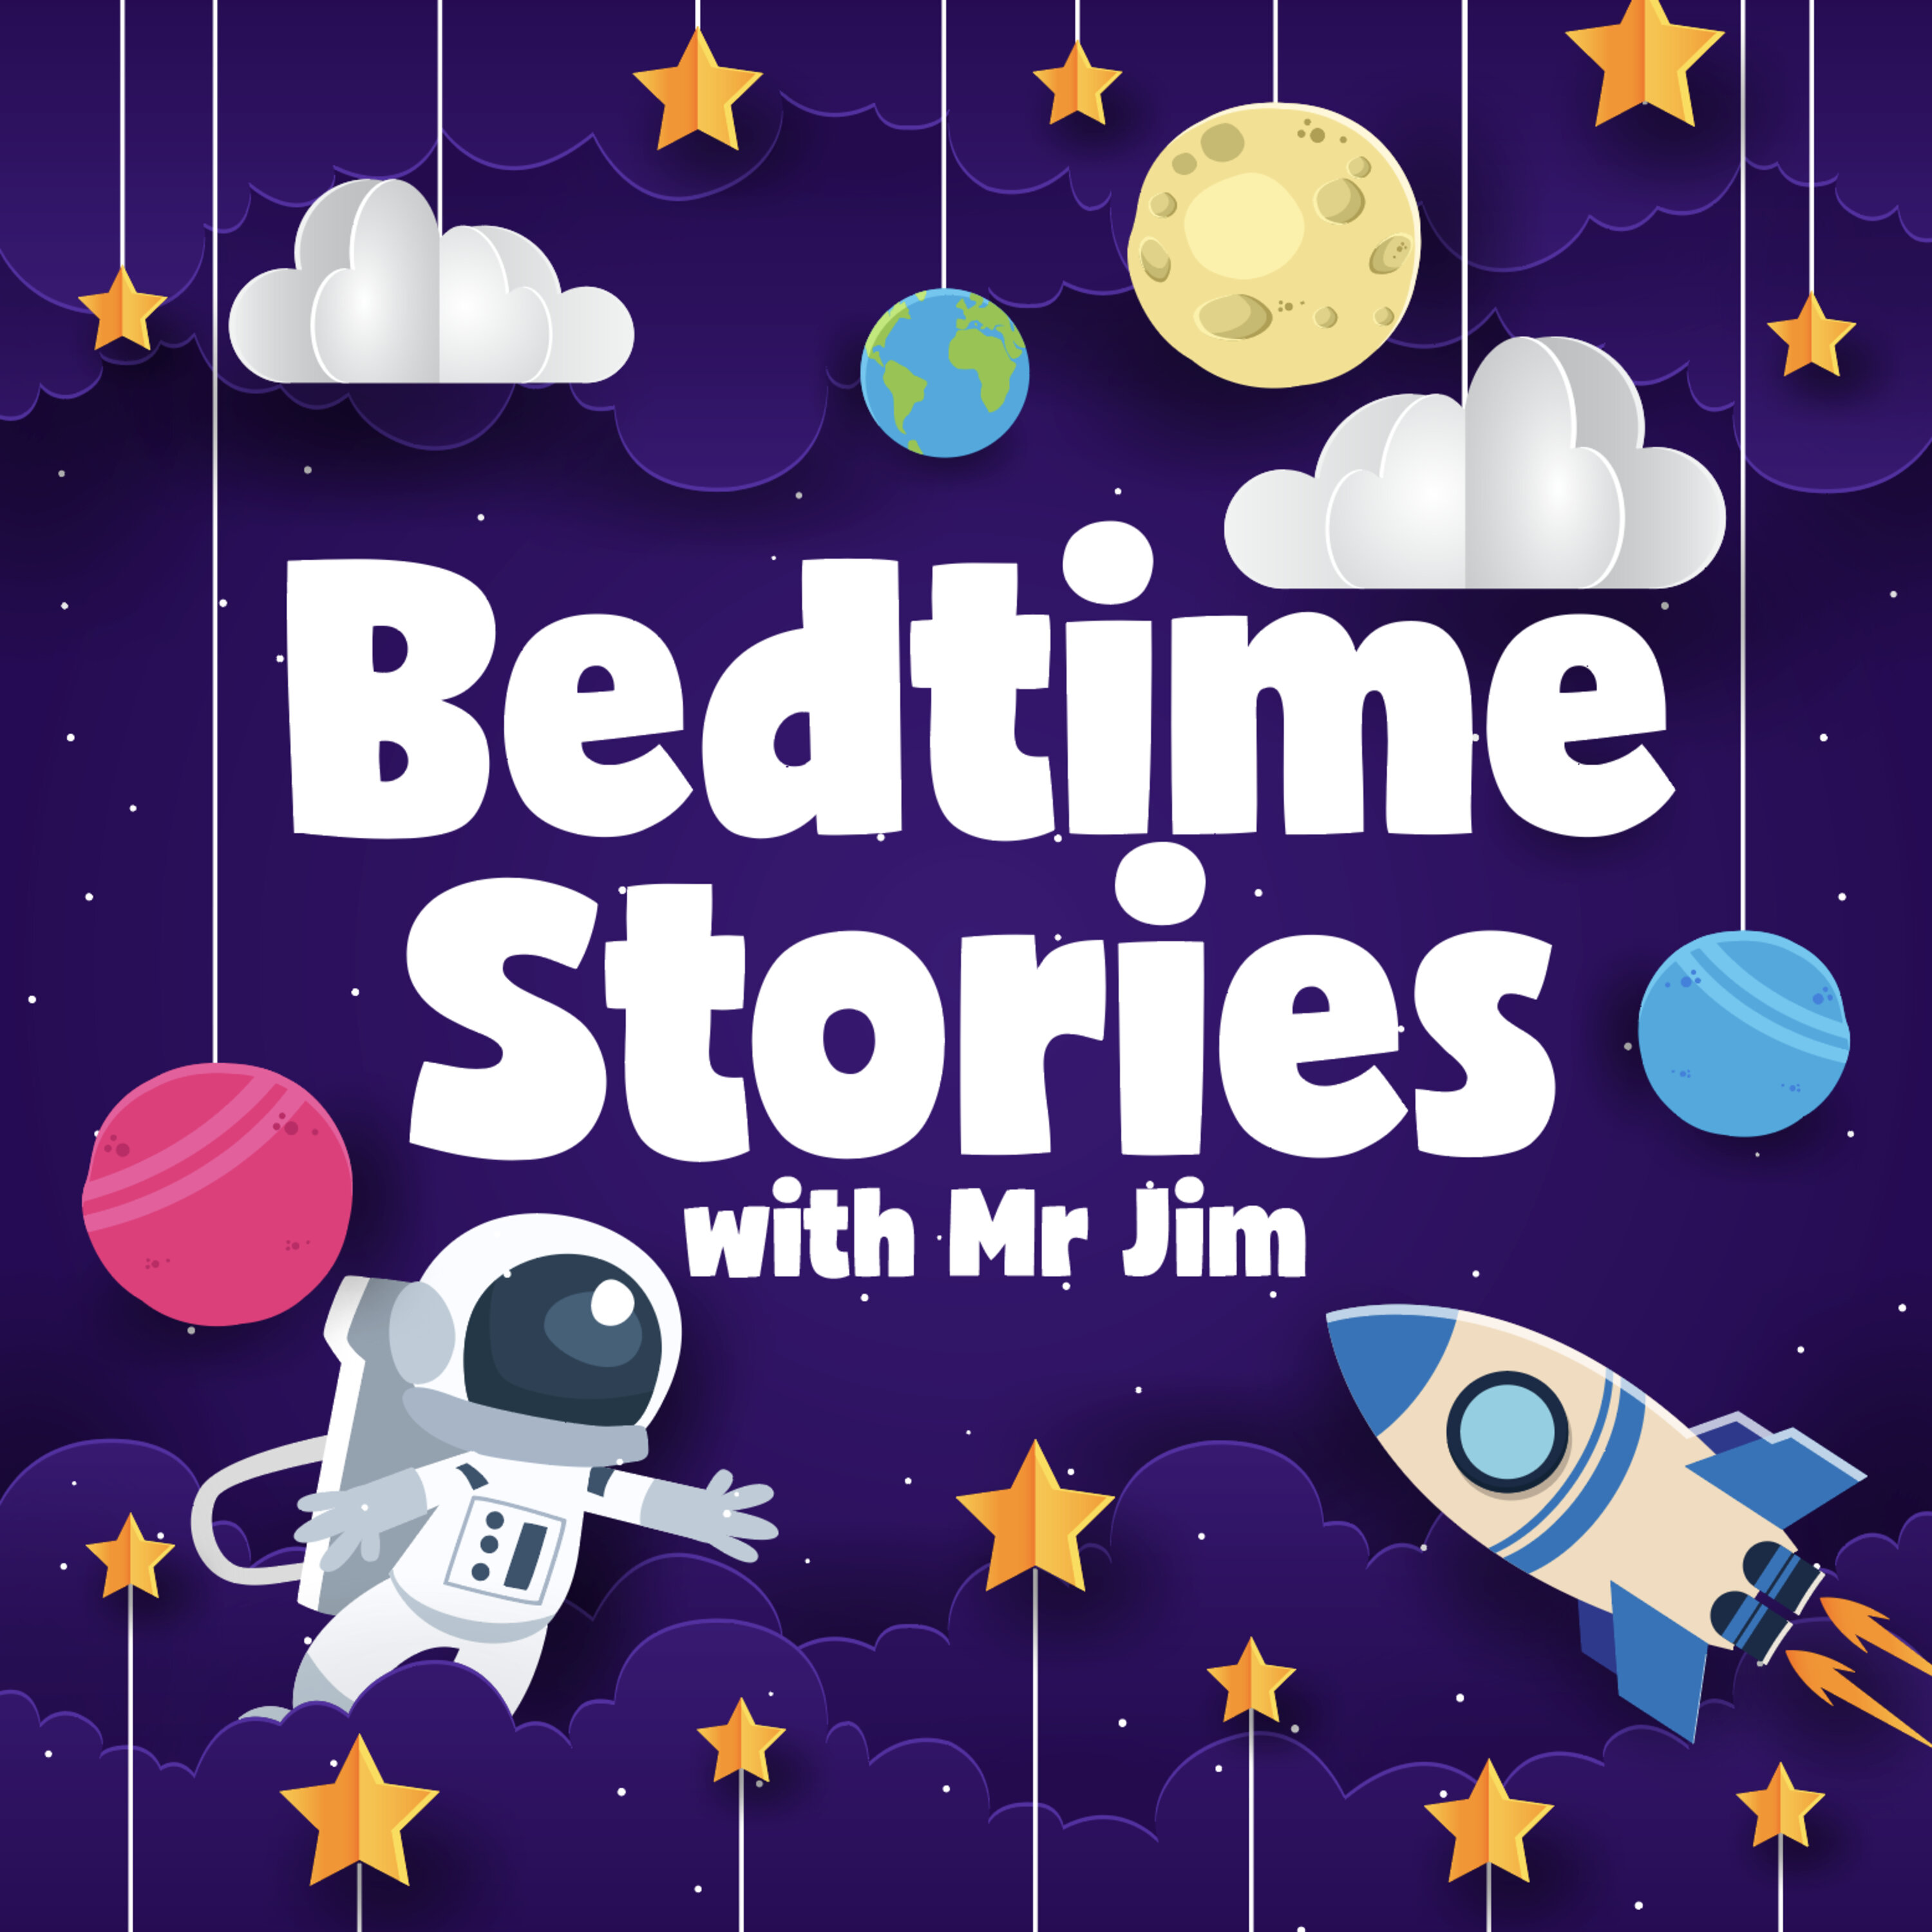 Bedtime Stories with Mr Jim podcast show image